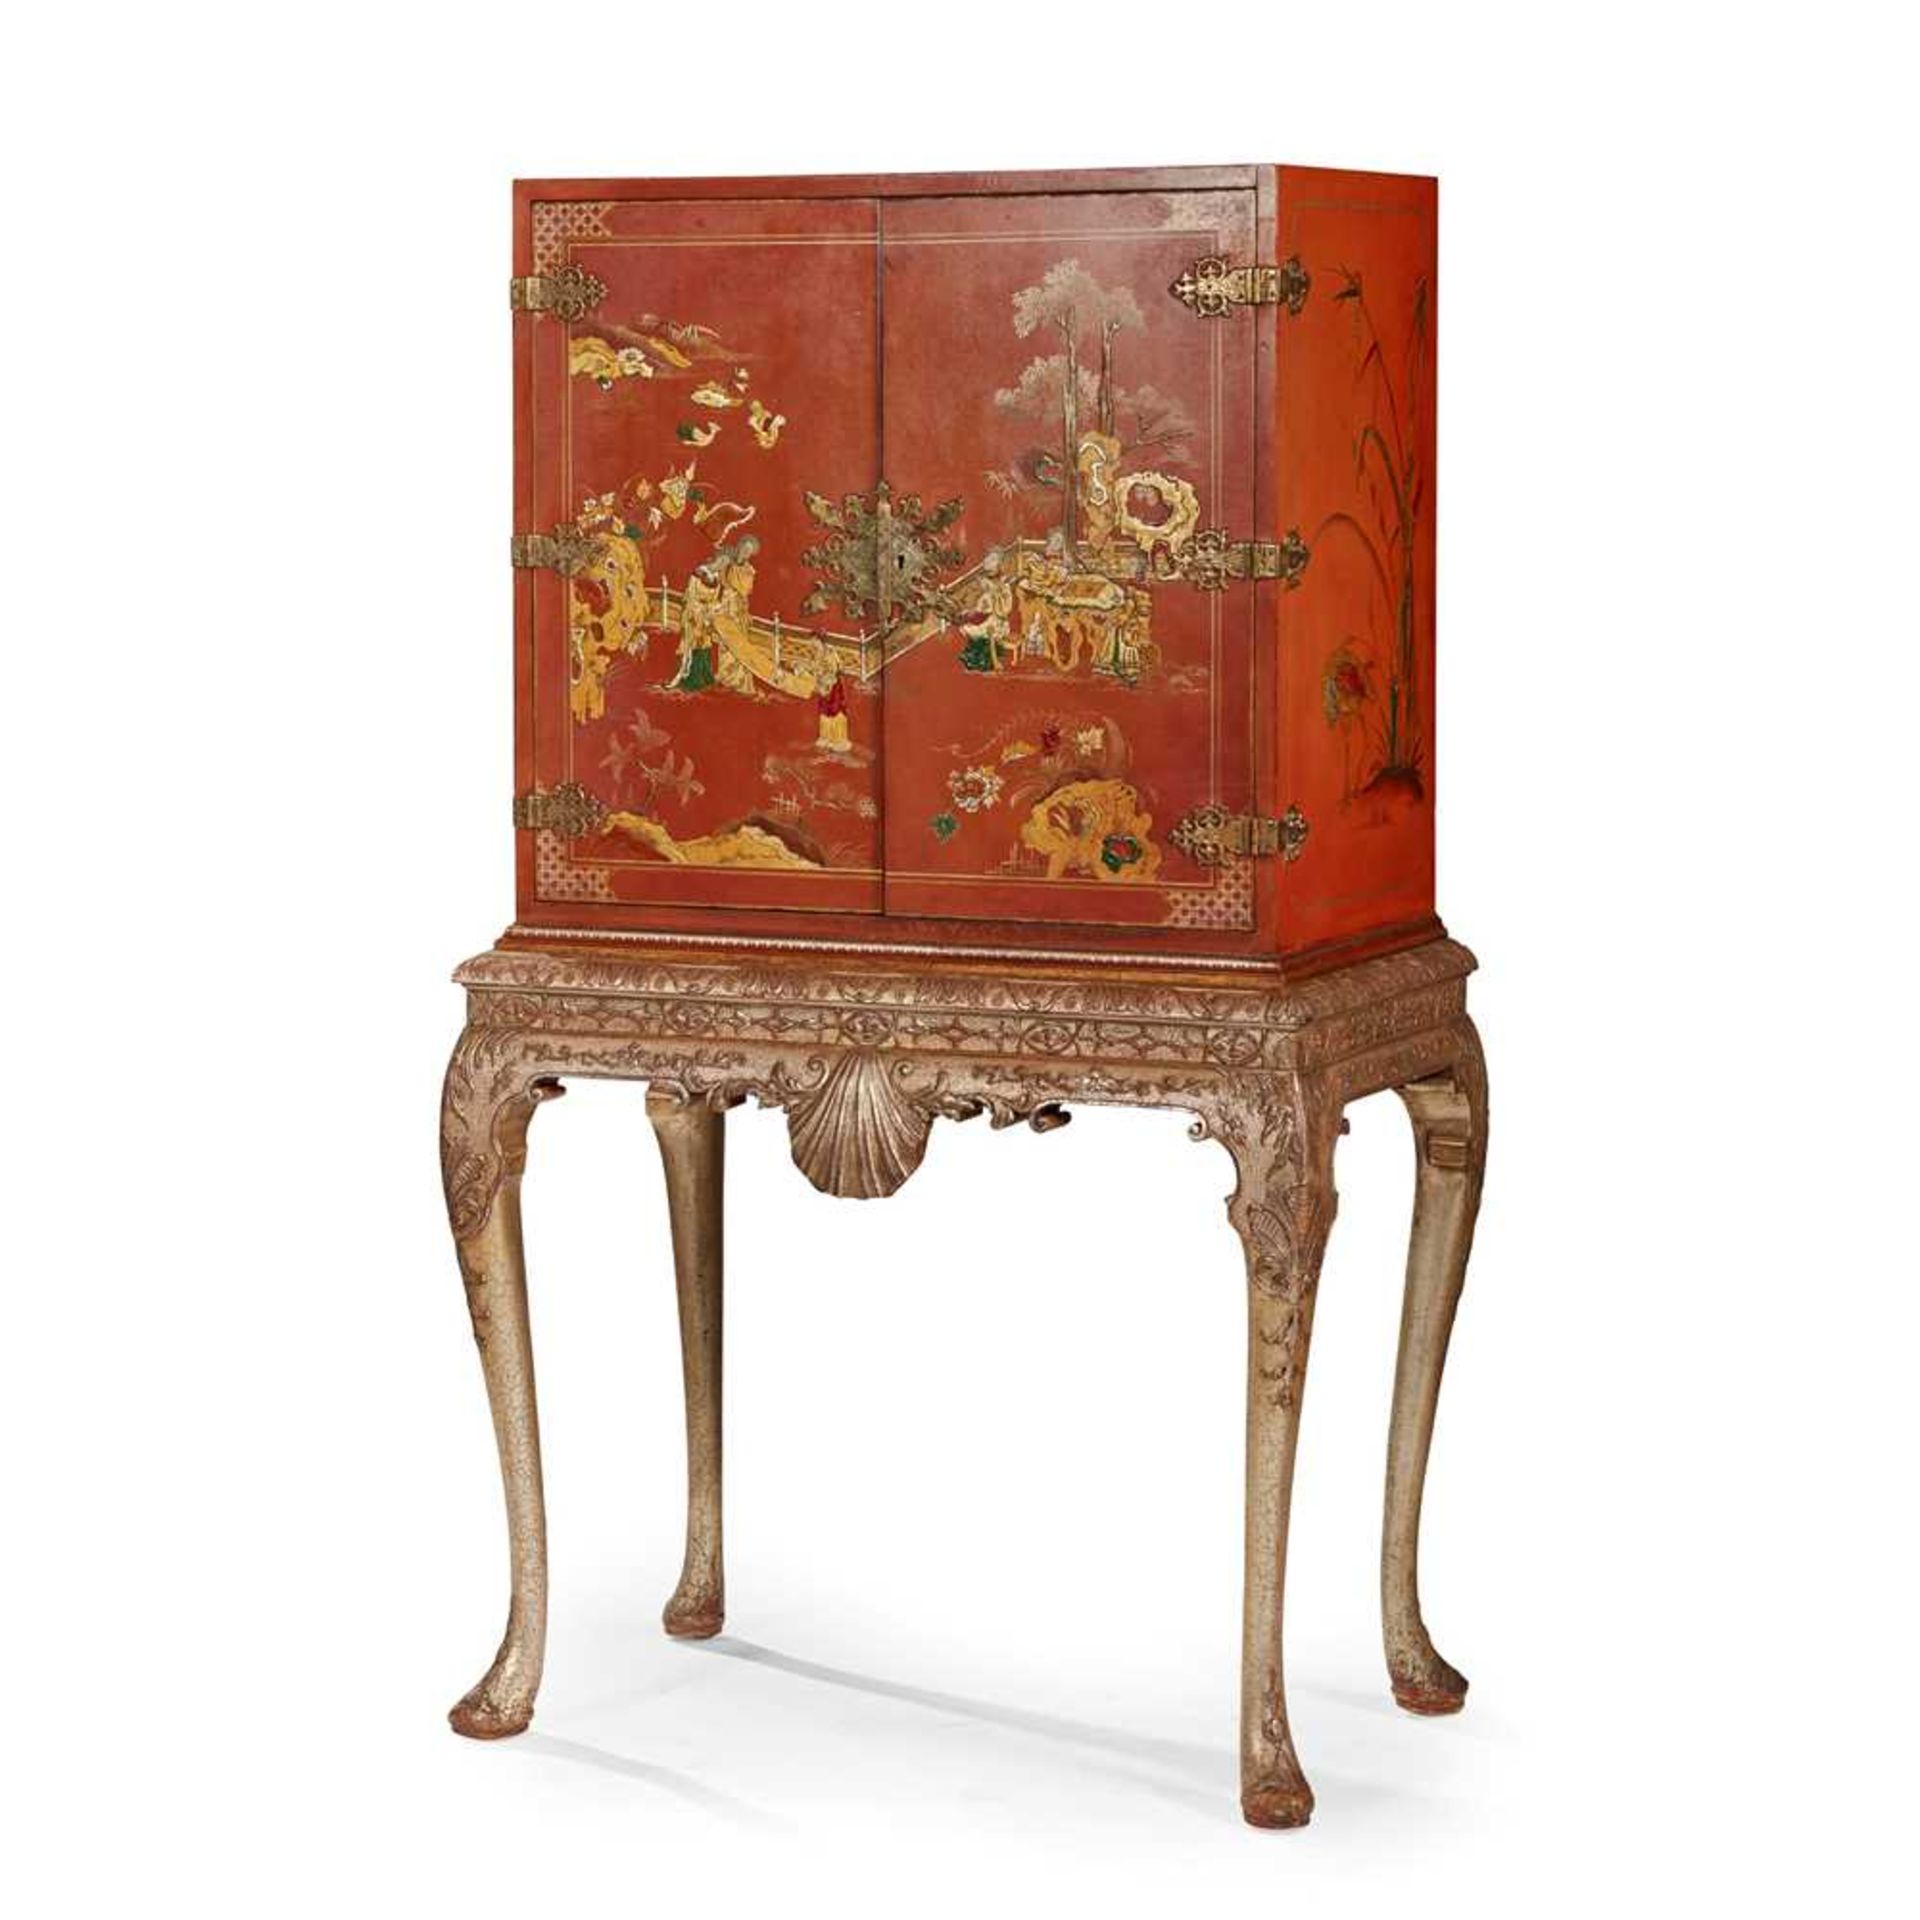 GEORGIAN STYLE RED JAPANNED CABINET-ON-STAND 20TH CENTURY